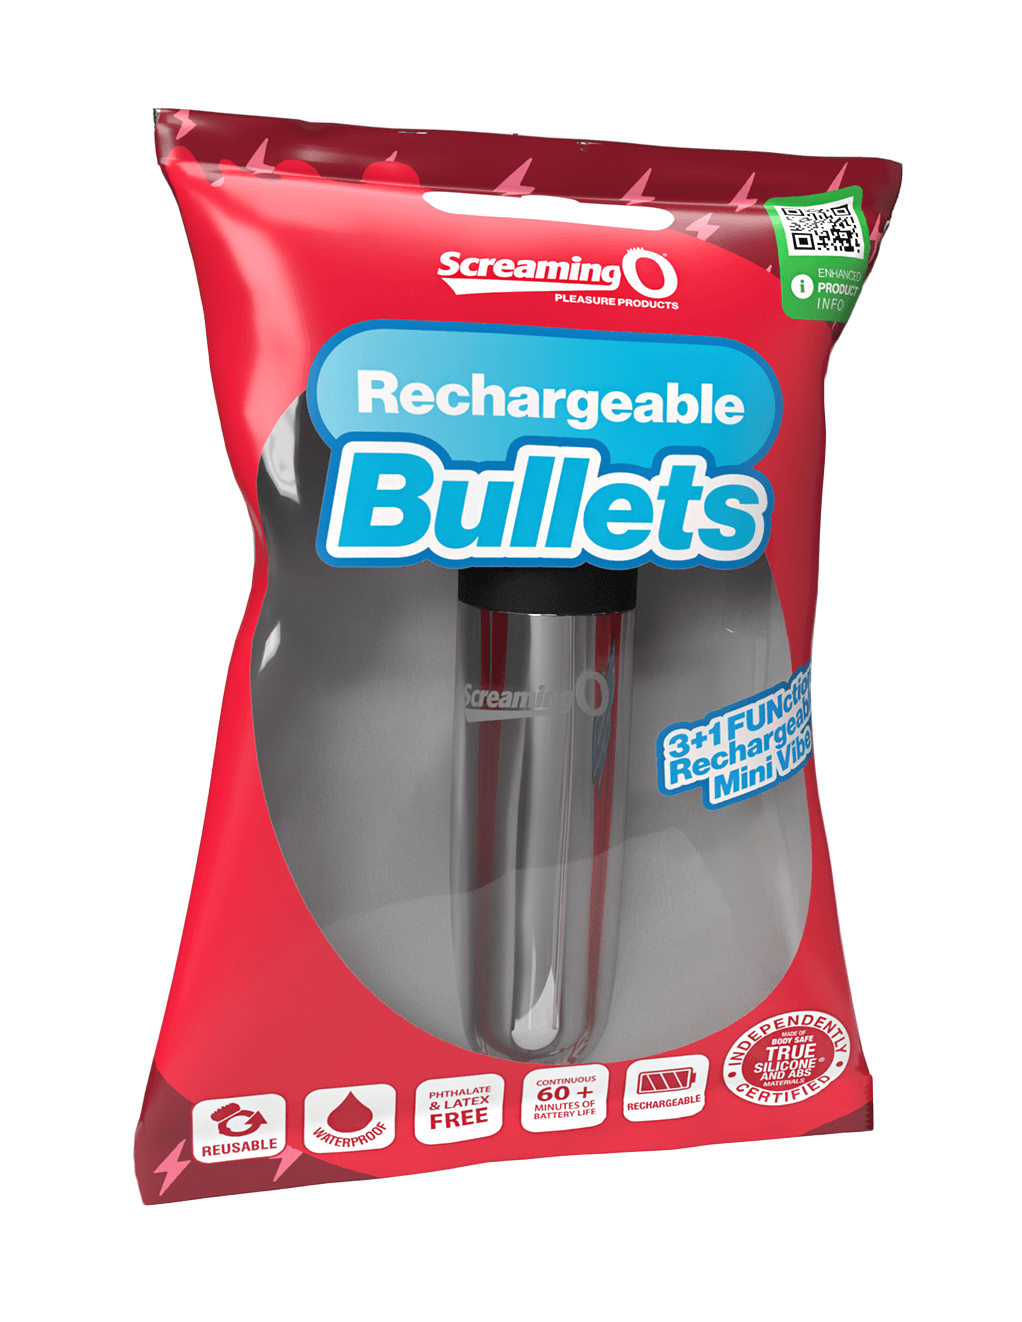 Screaming O Rechargeable Bullet - Silver - Packaging